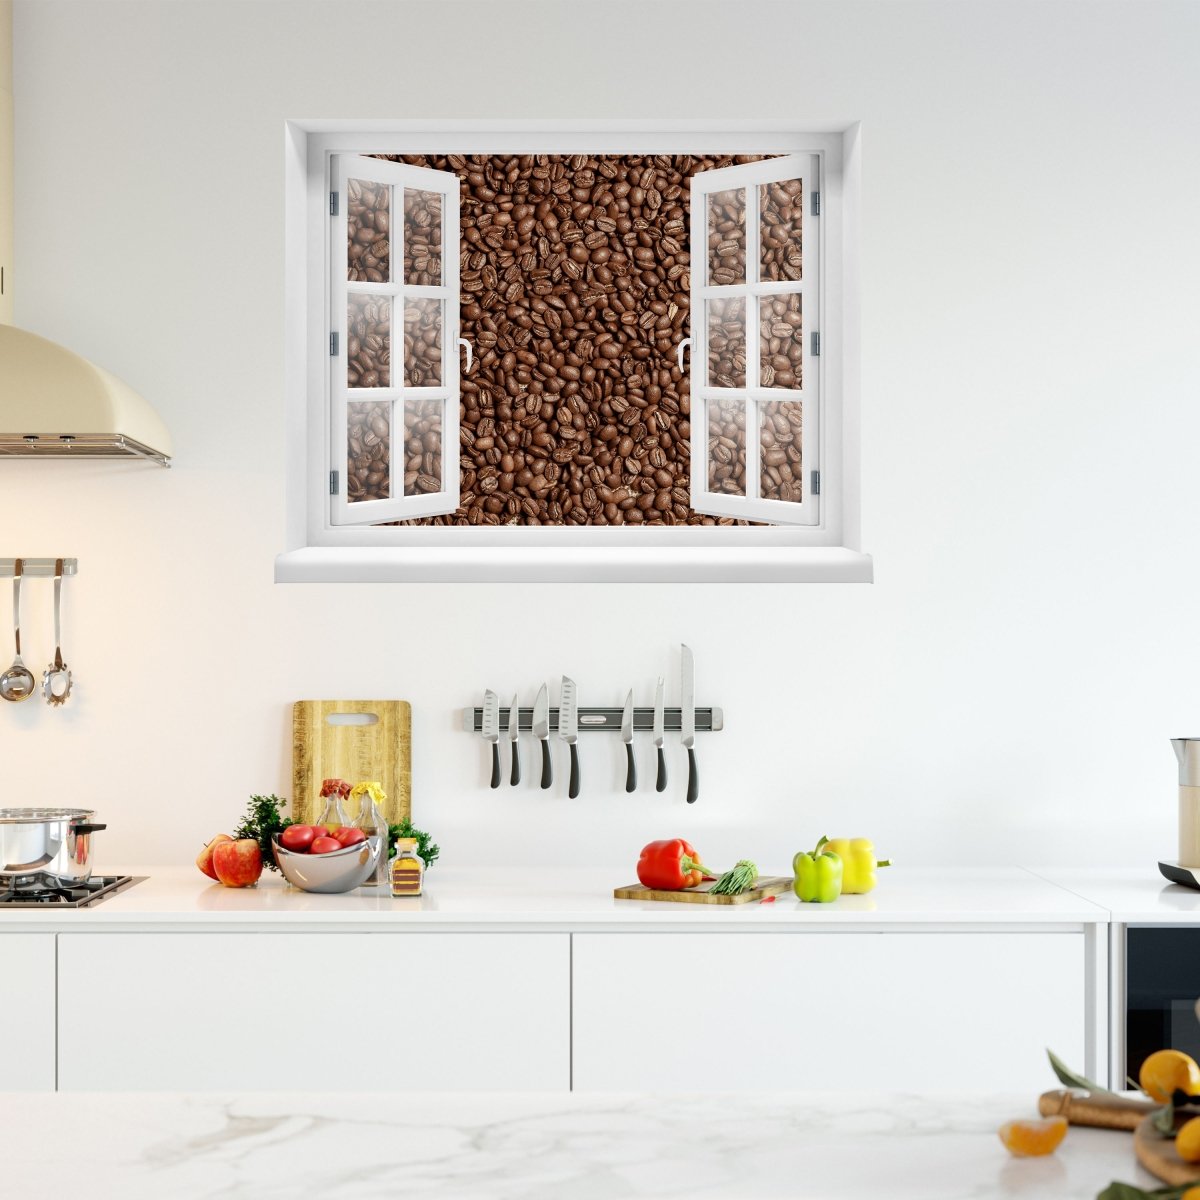 Roasted brown coffee bean 3D wall sticker - Wall Decal M0843